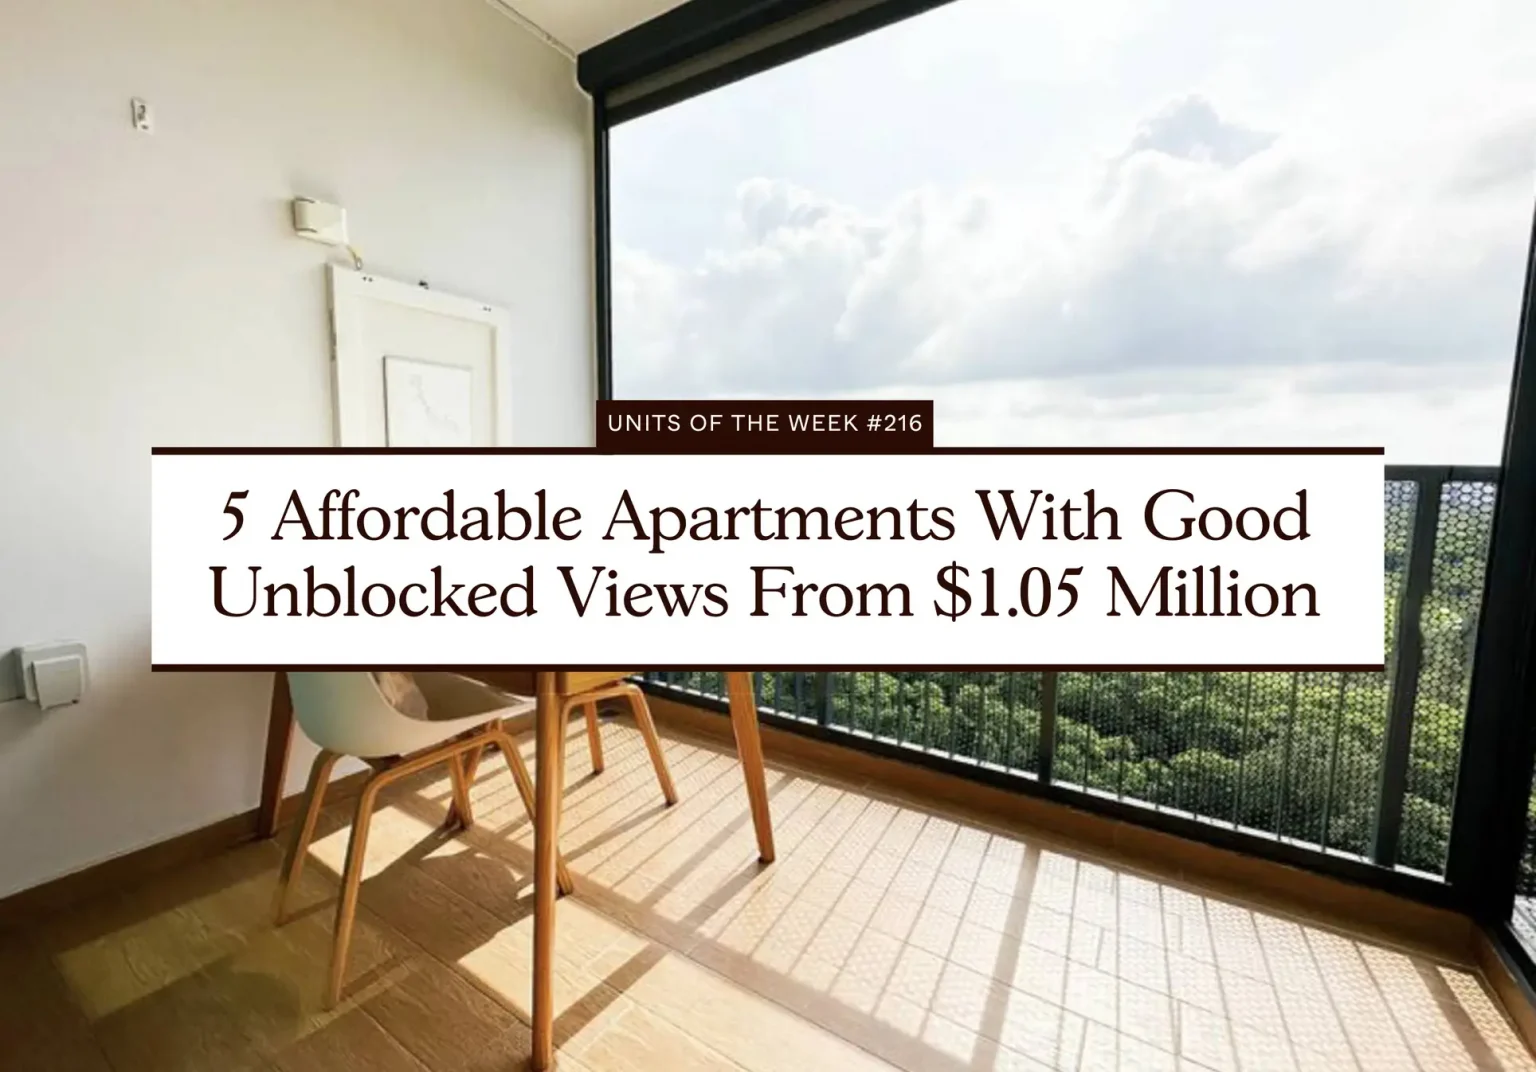 5 Affordable Apartments With Good Unblocked Views From $1.05 Million